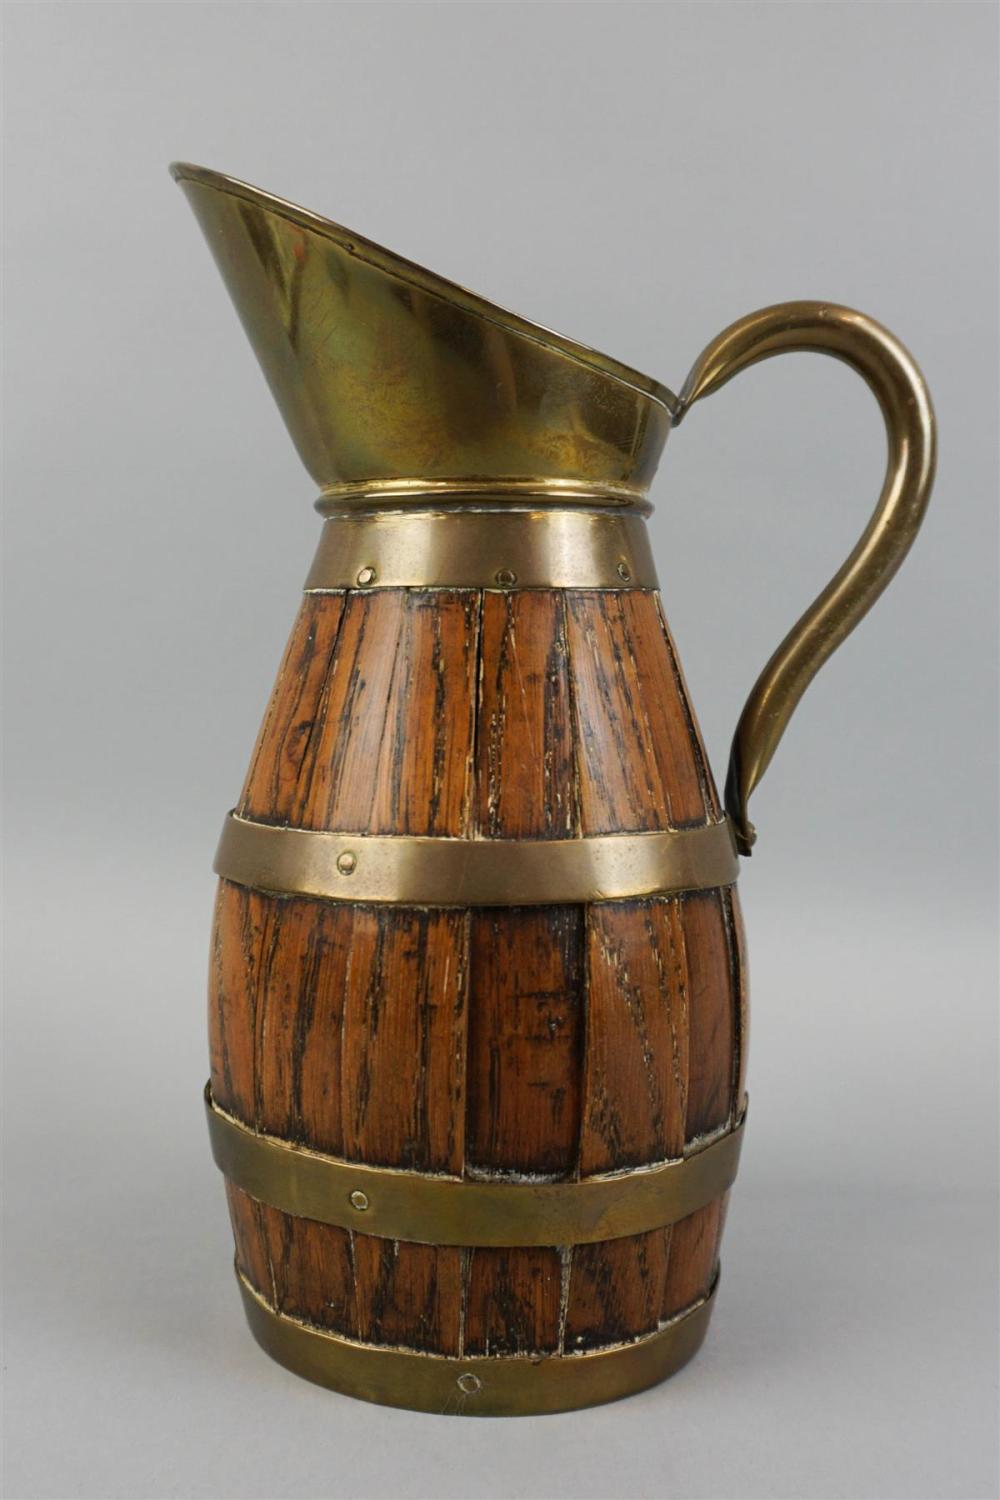 BARREL SHAPED WOOD PITCHER WITH 33b54a